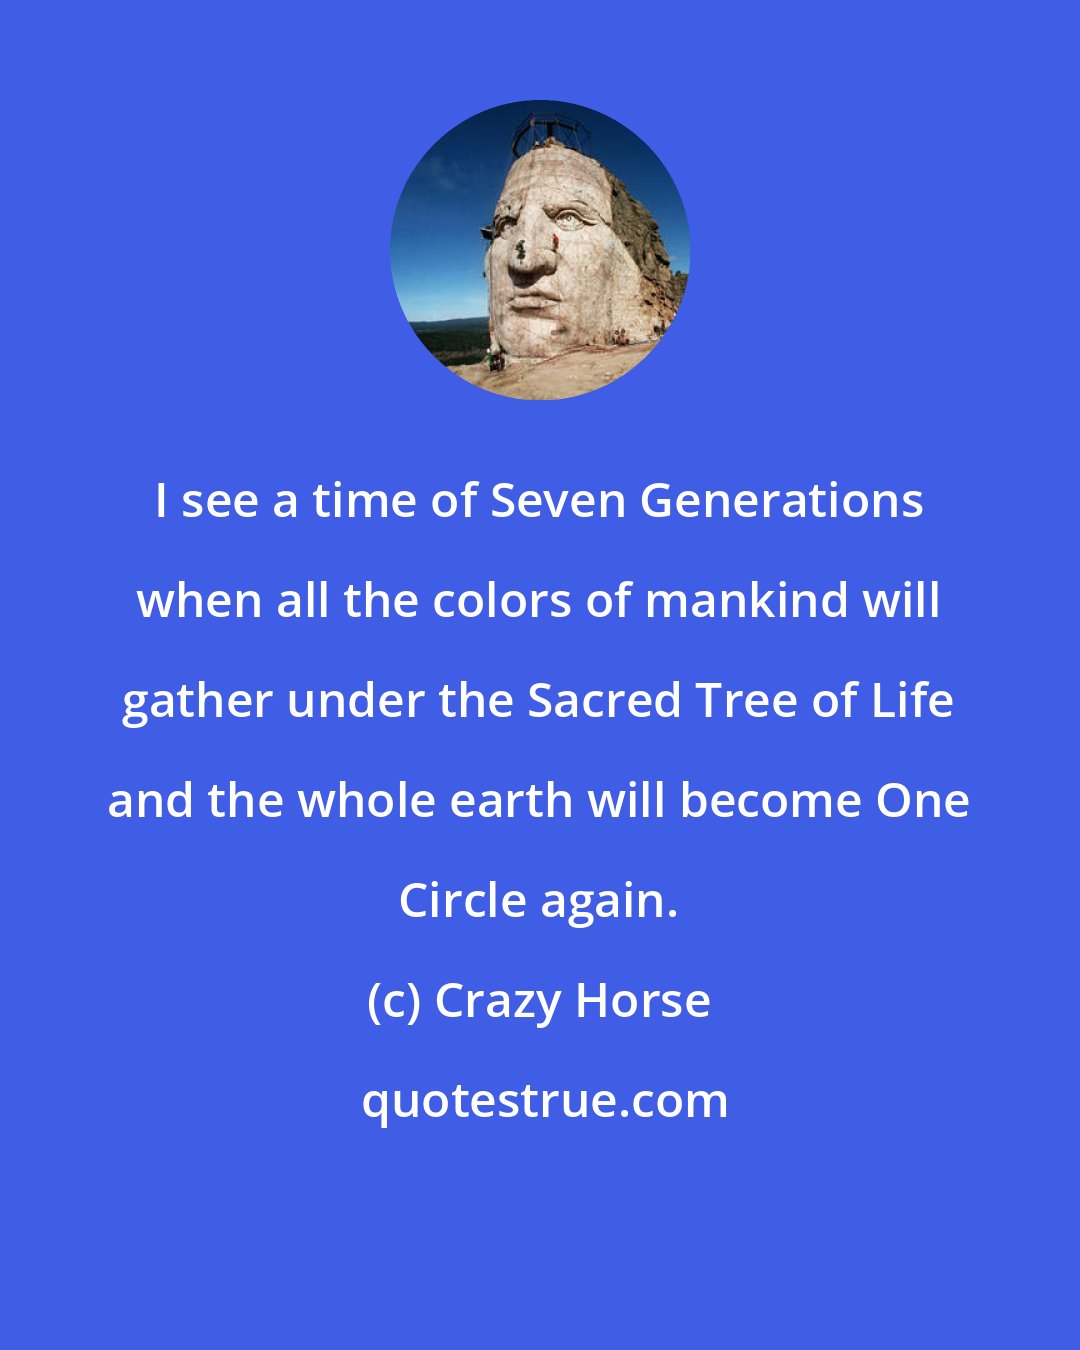 Crazy Horse: I see a time of Seven Generations when all the colors of mankind will gather under the Sacred Tree of Life and the whole earth will become One Circle again.